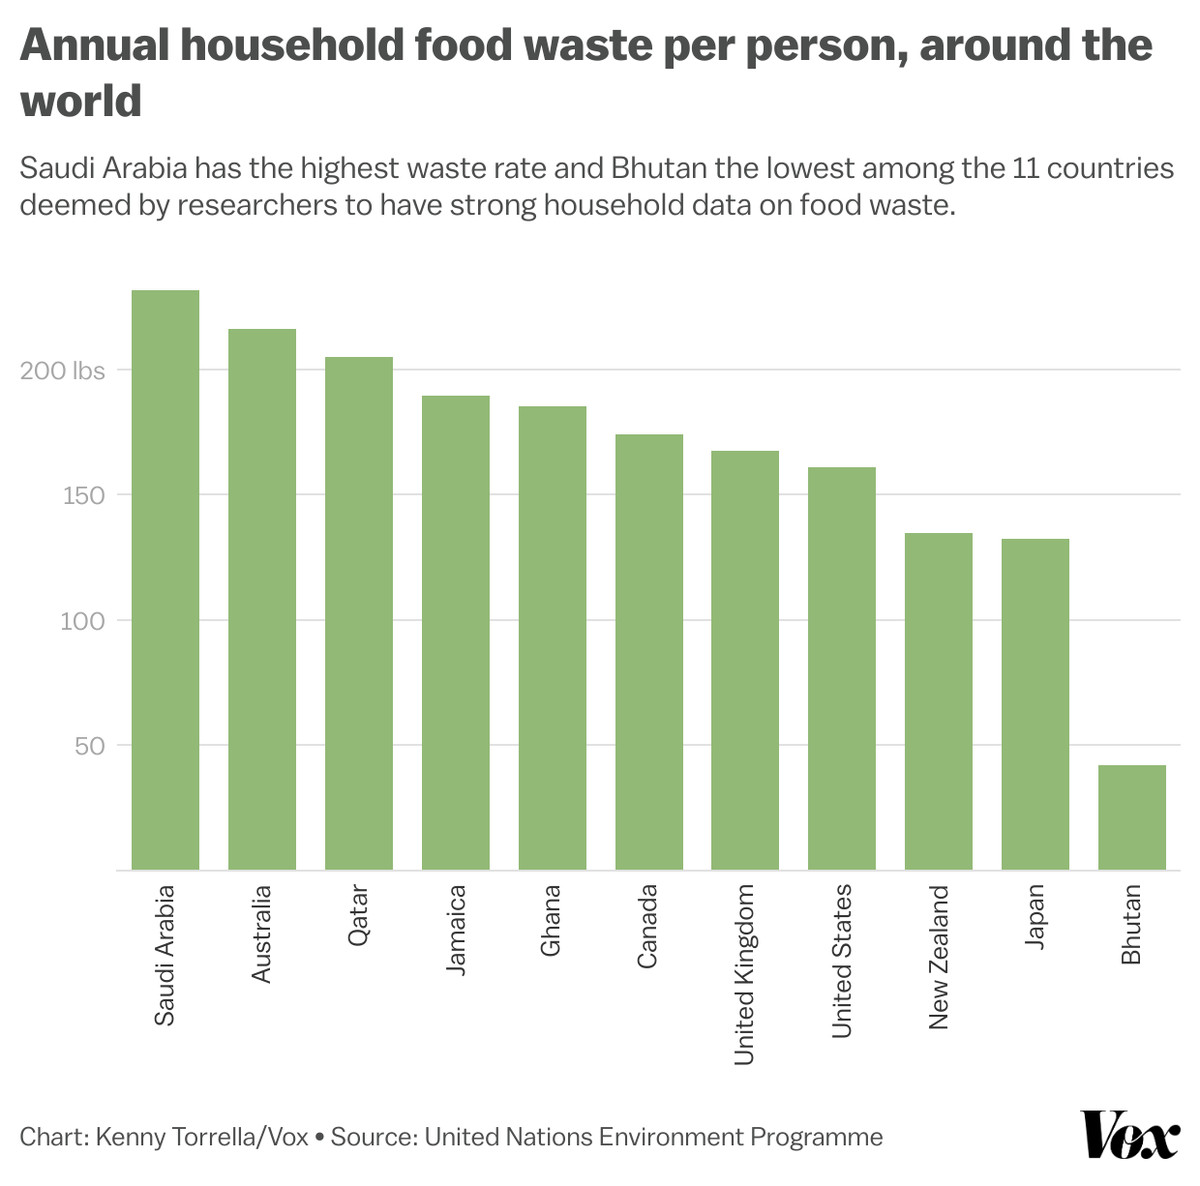 A bar graph titled “Household food waste per person, around the world”. Below the title, it says “Saudi Arabia has the highest waste rate and Bhutan the lowest among the 11 countries deemed by researchers to have strong household data on food waste.” The eleven countries are, in order from most waste to least waste, Saudi Arabia, Australia, Qatar, Jamaica, Ghana, Canada, United Kingdom, United States, New Zealand, Japan, and Bhutan.